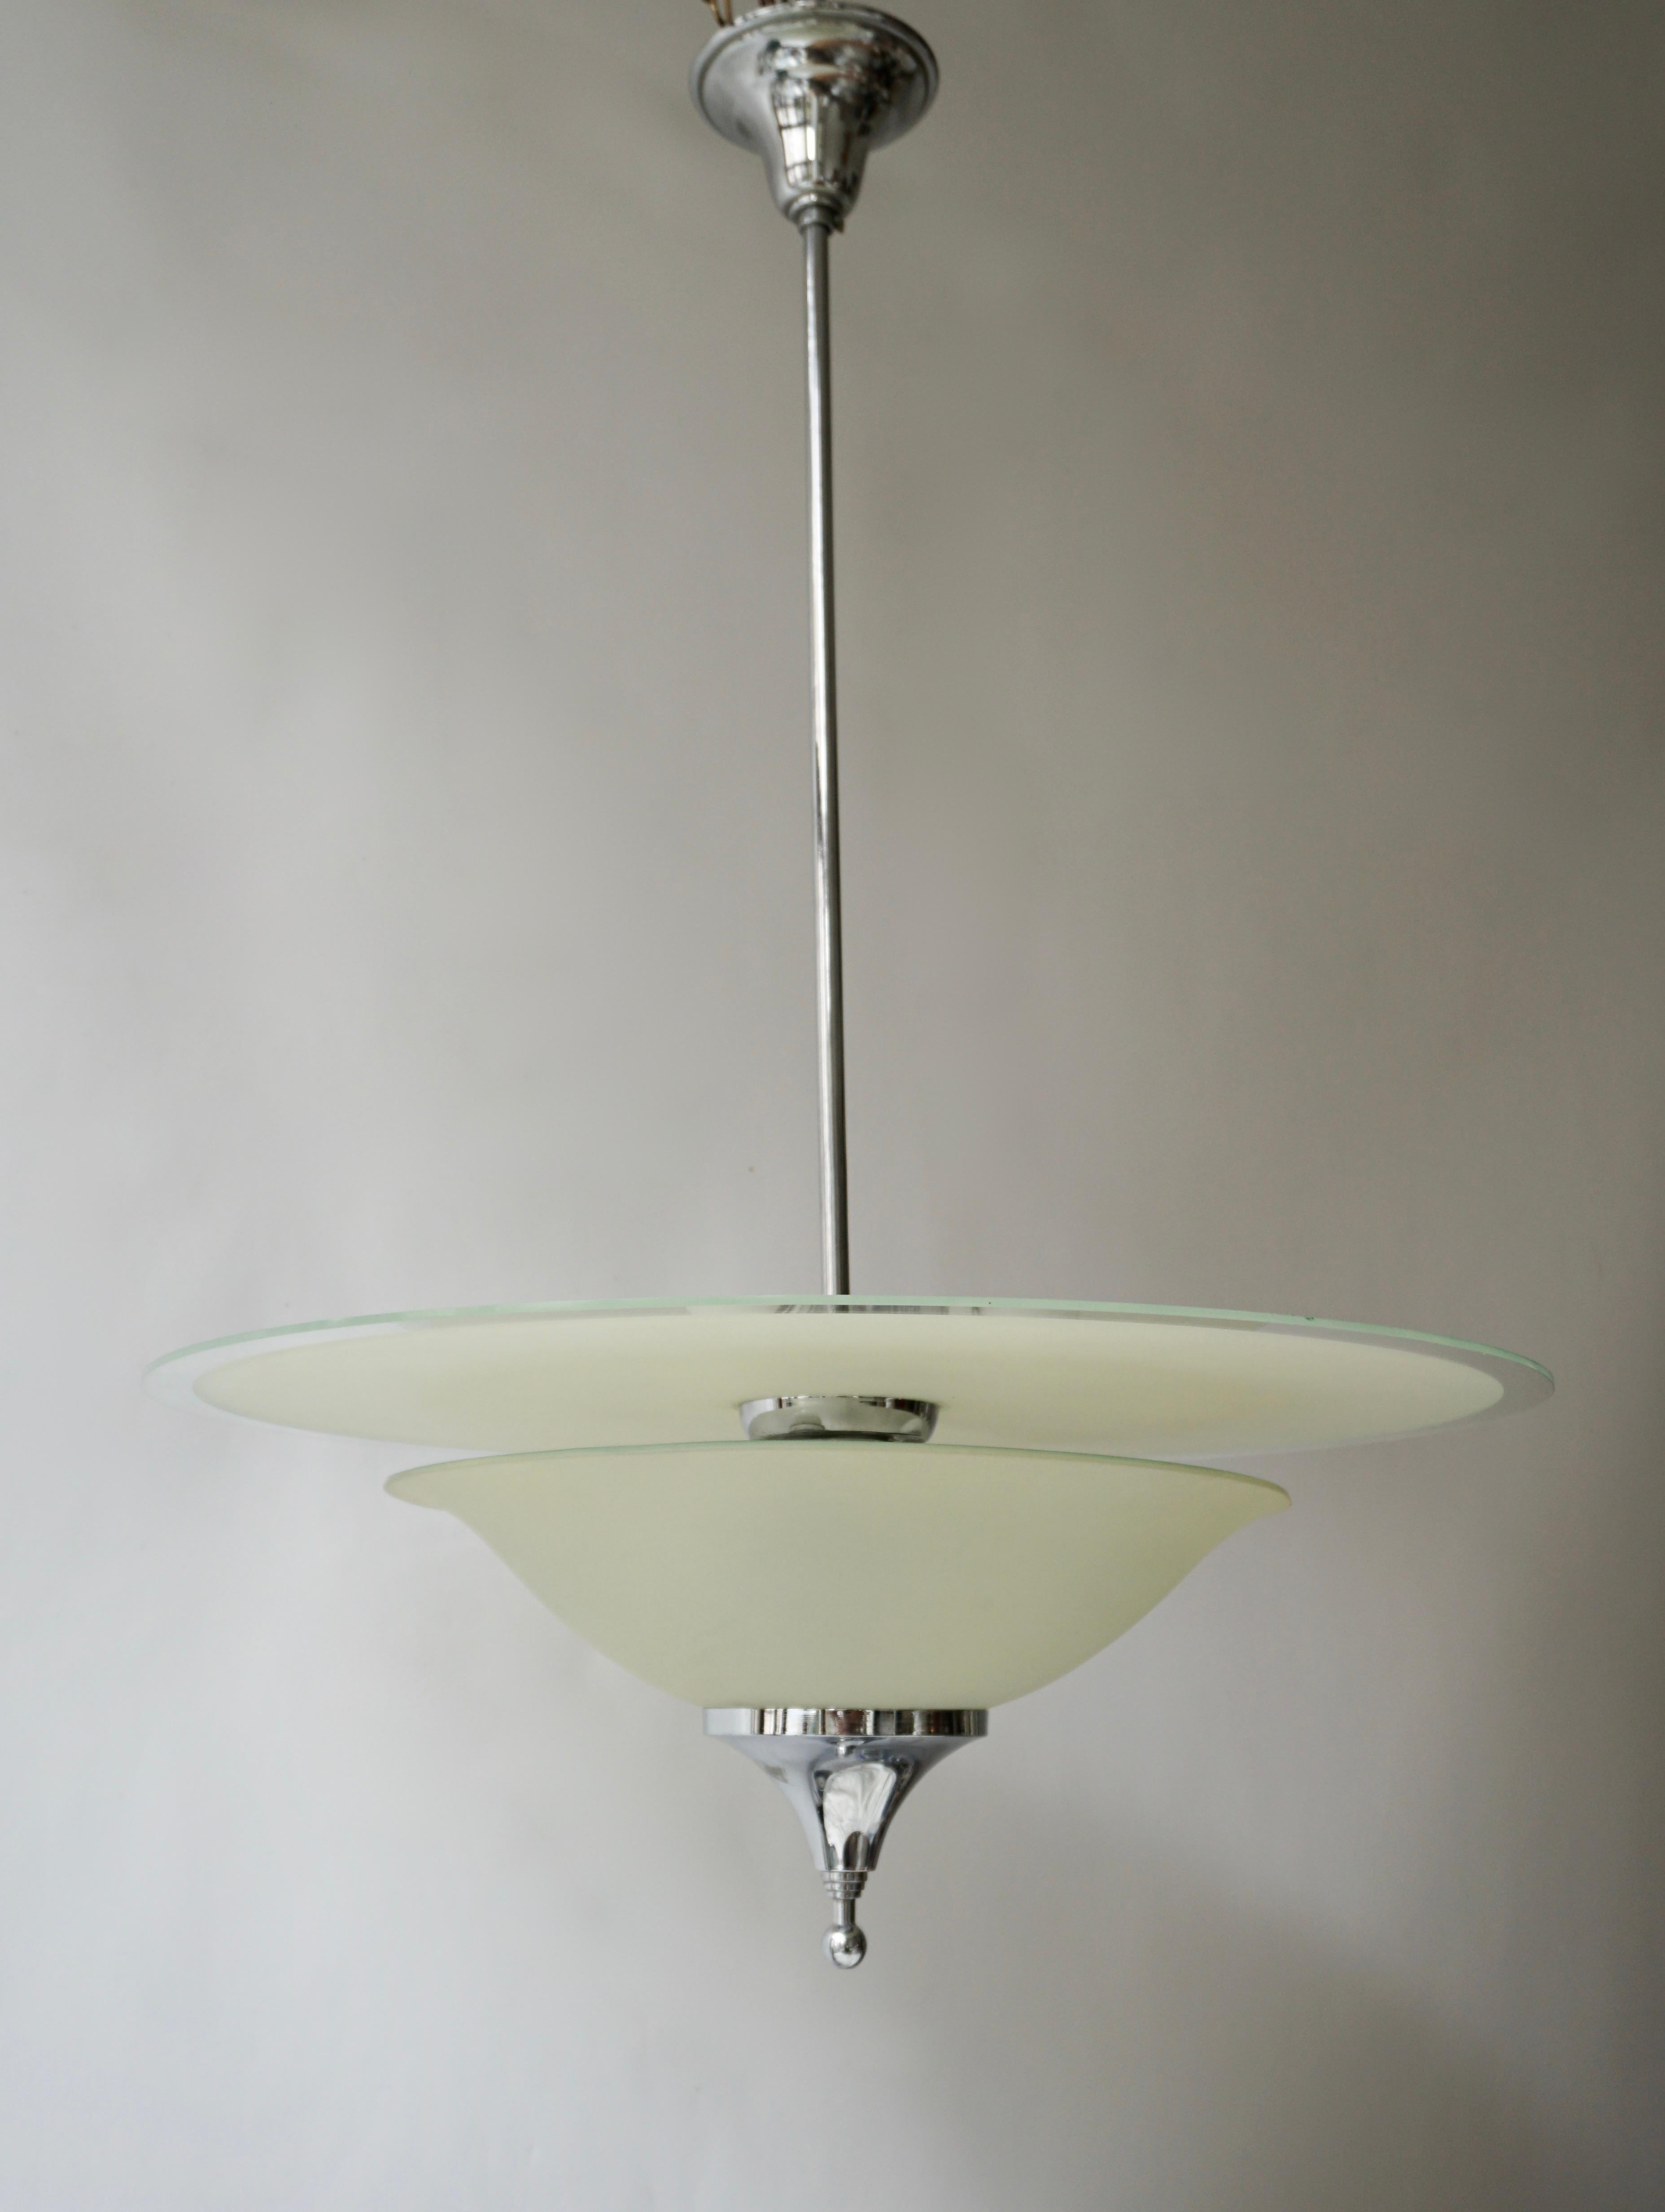 Mid-Century Modern Art Deco Ceiling Light in Glass and Chrome, Belgium, 1930s For Sale